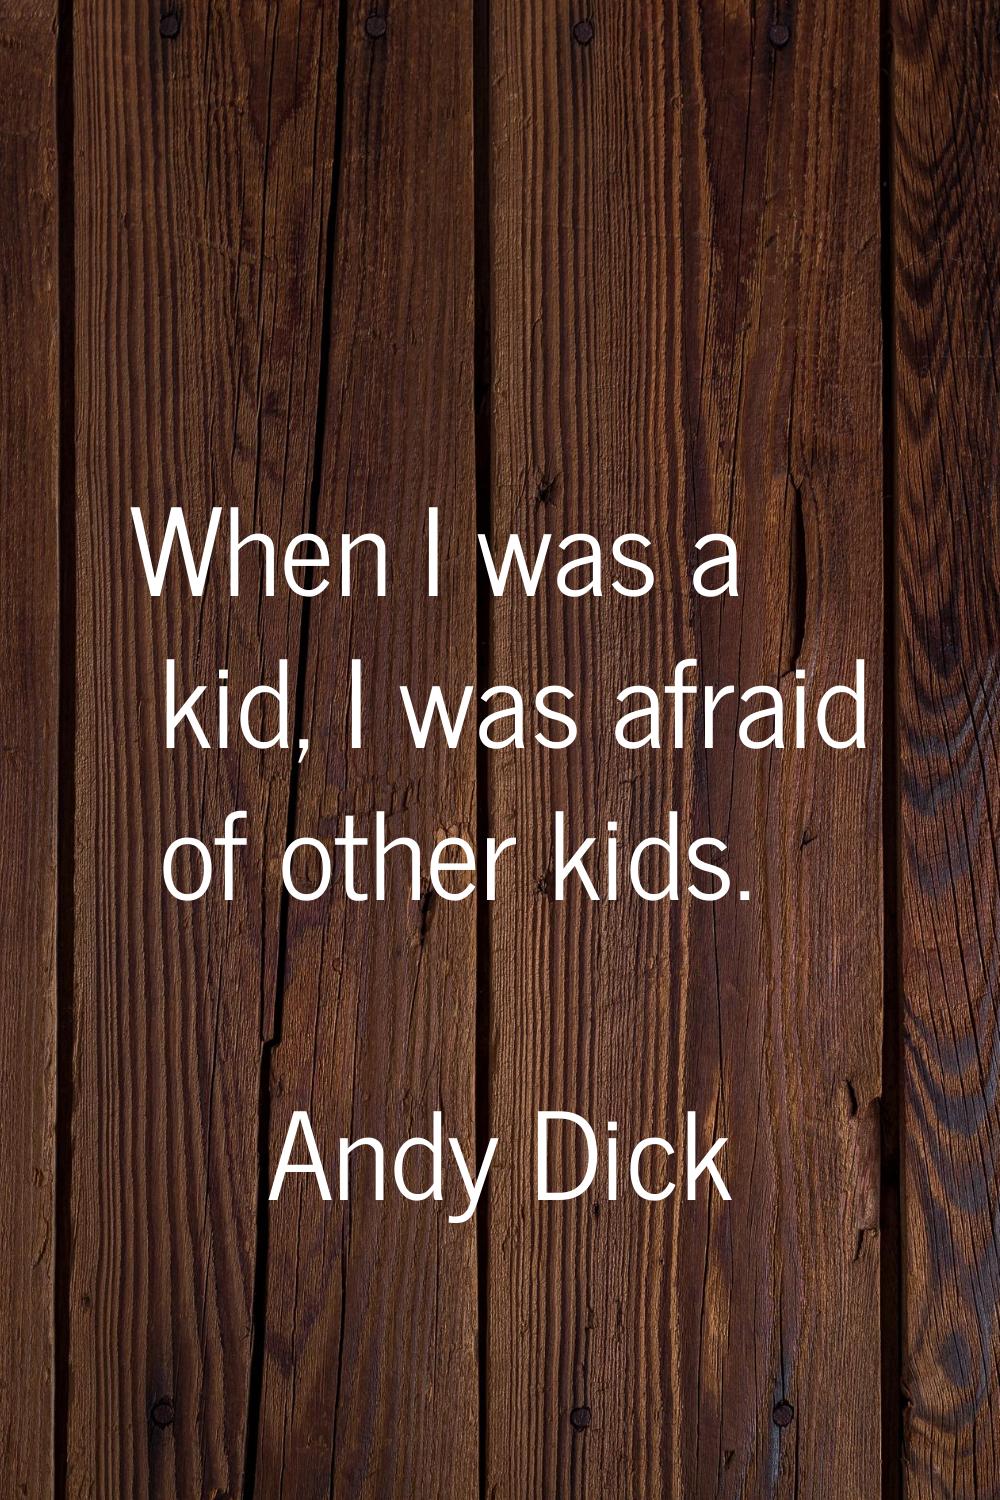 When I was a kid, I was afraid of other kids.